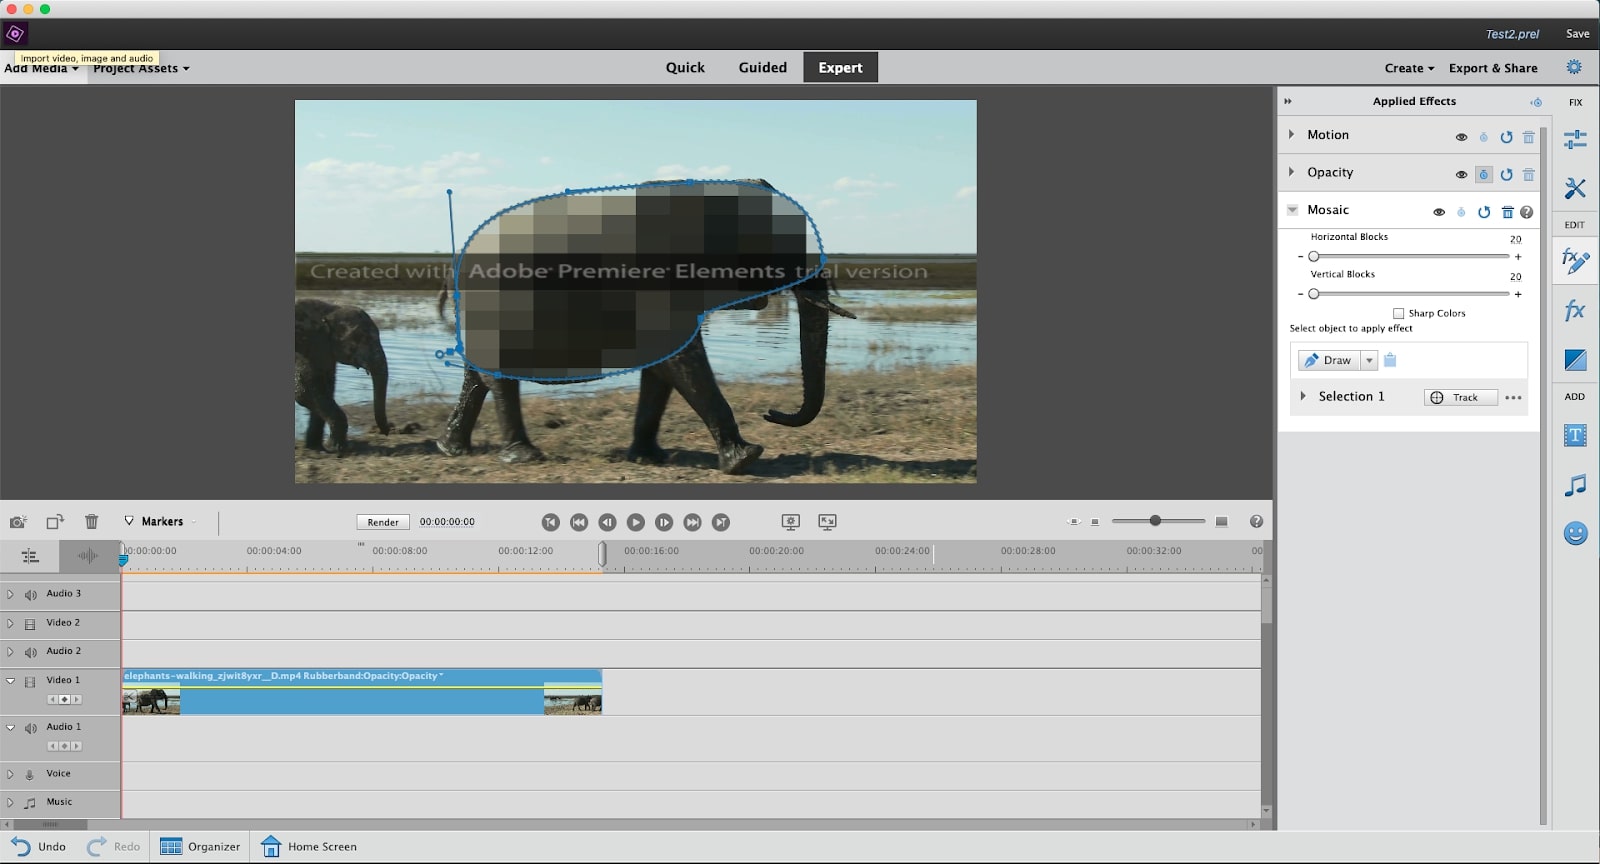 Screengrab showing elephant footage being edited in Adobe Premiere Elements, one of the best video editing software tools